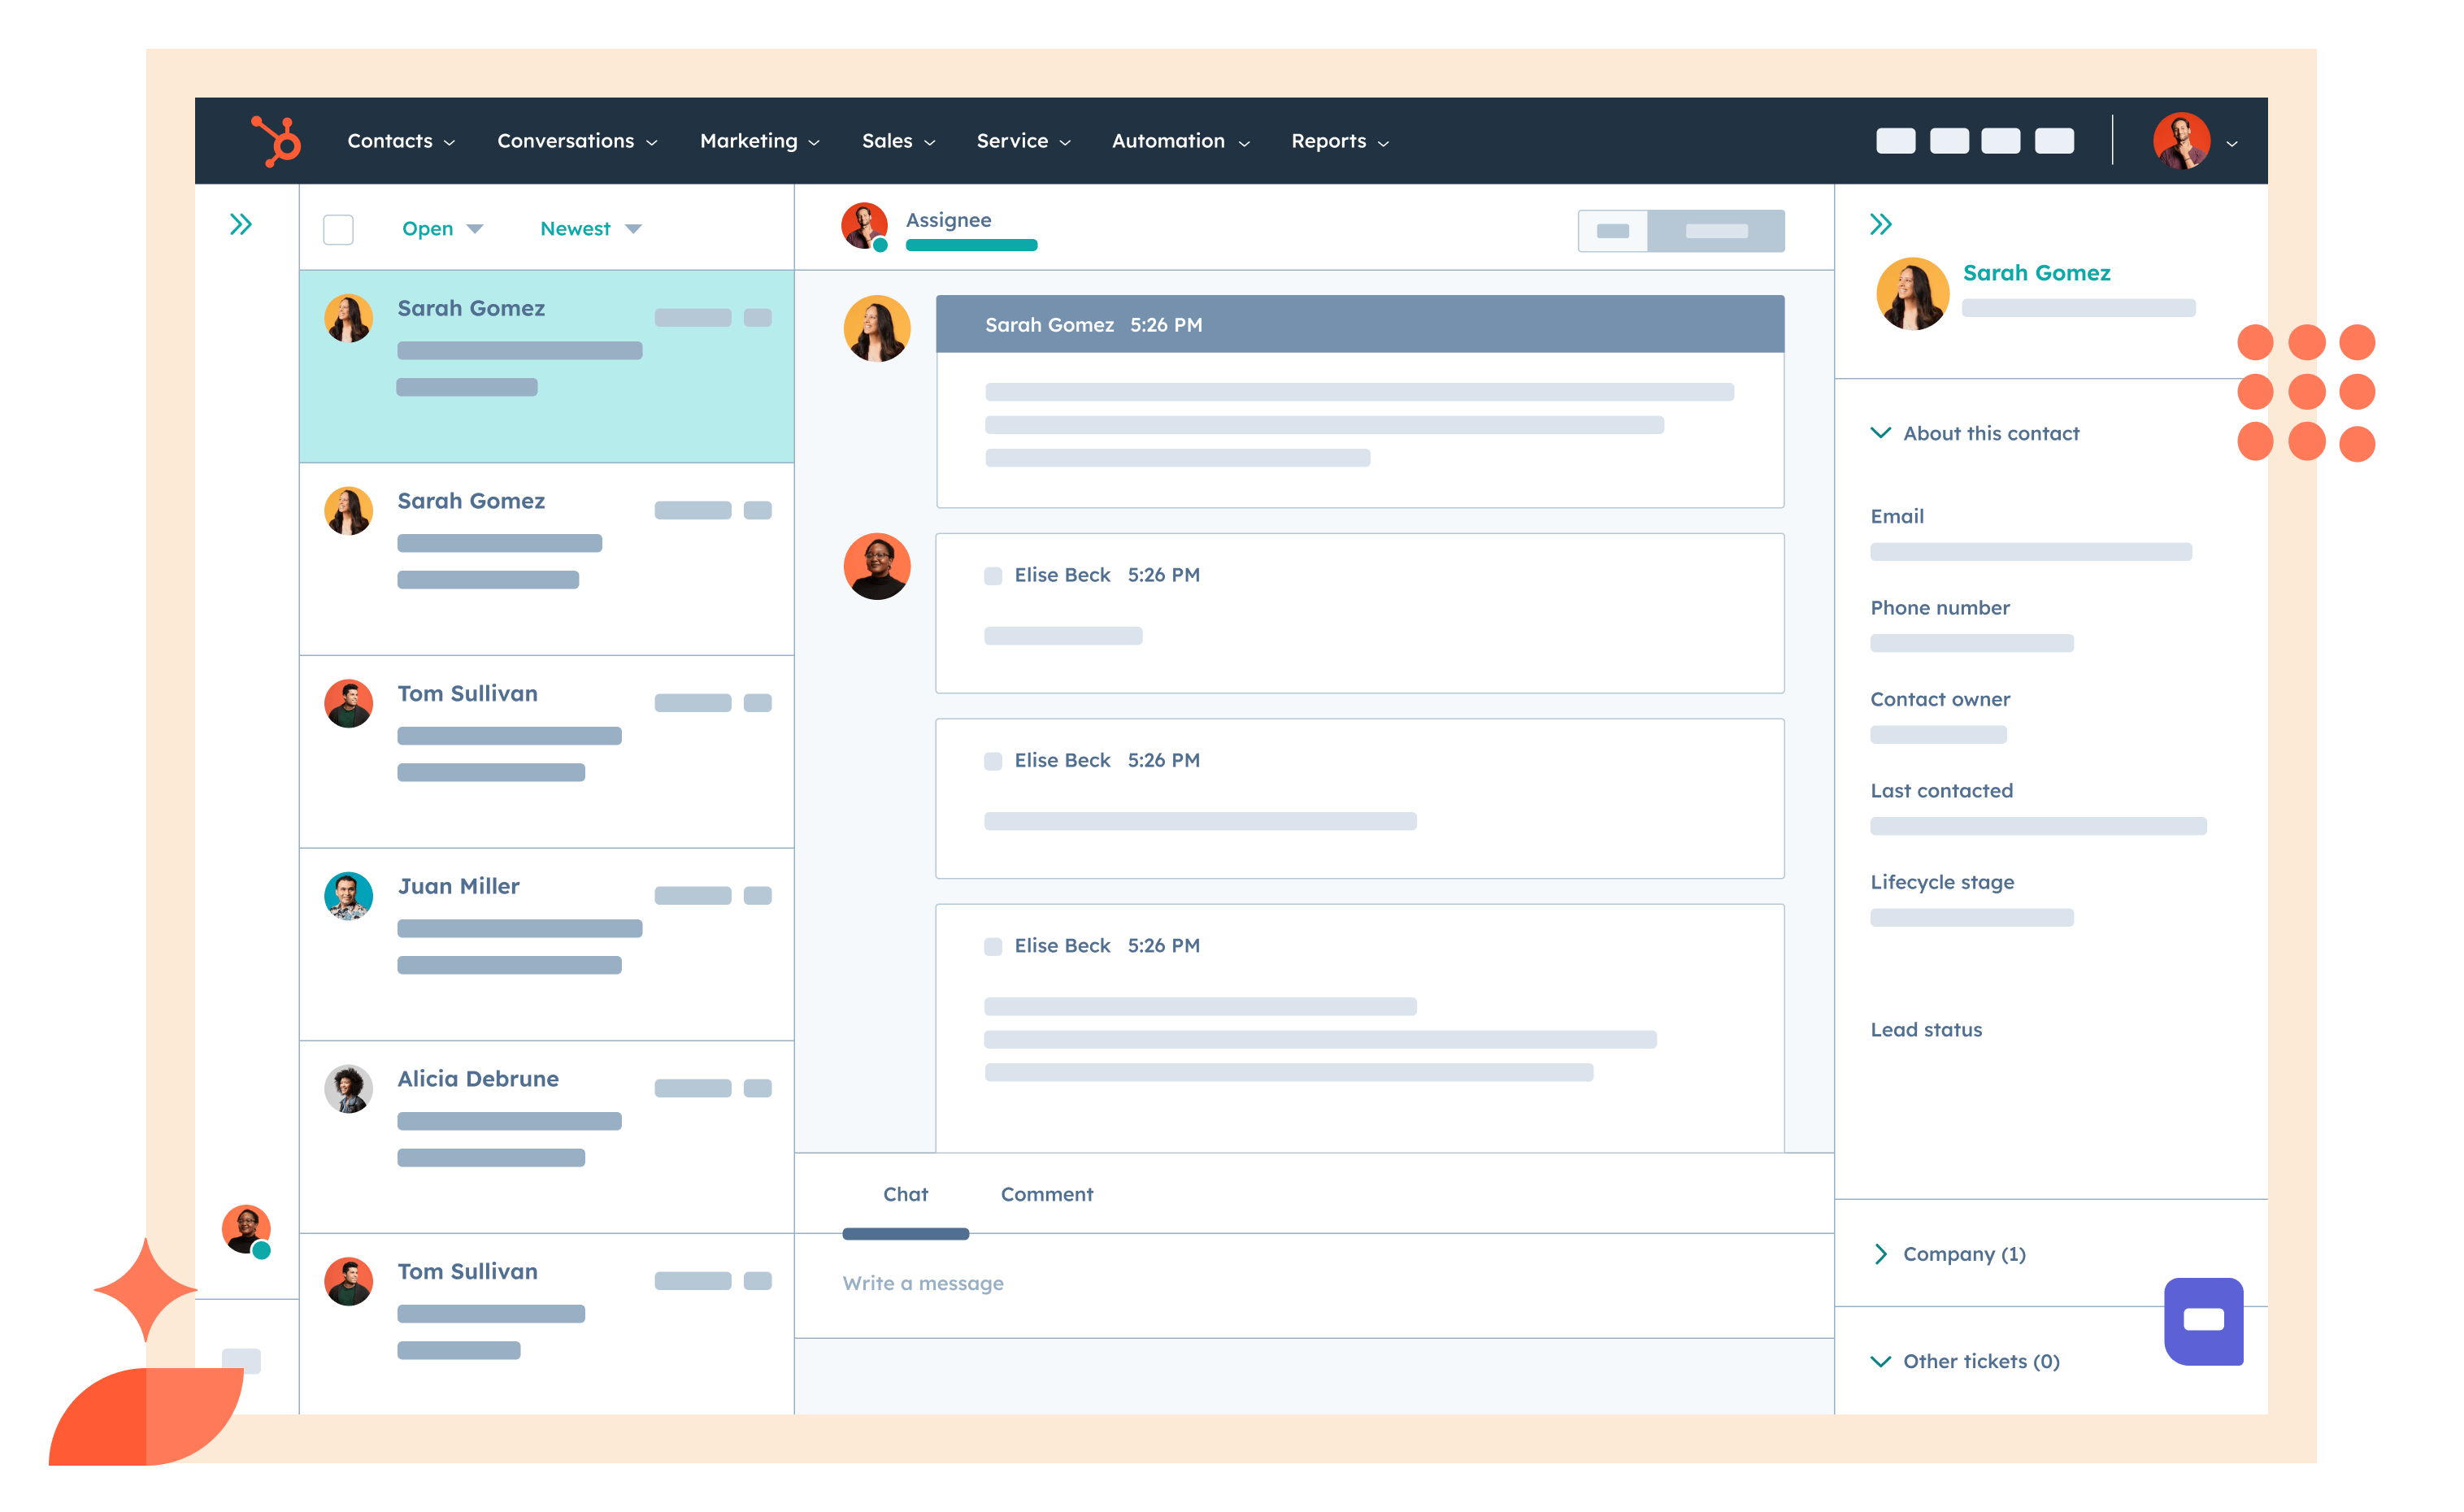 HubSpot simplified UI showing activity and interactions between a contact and various team members in HubSpot Smart CRM